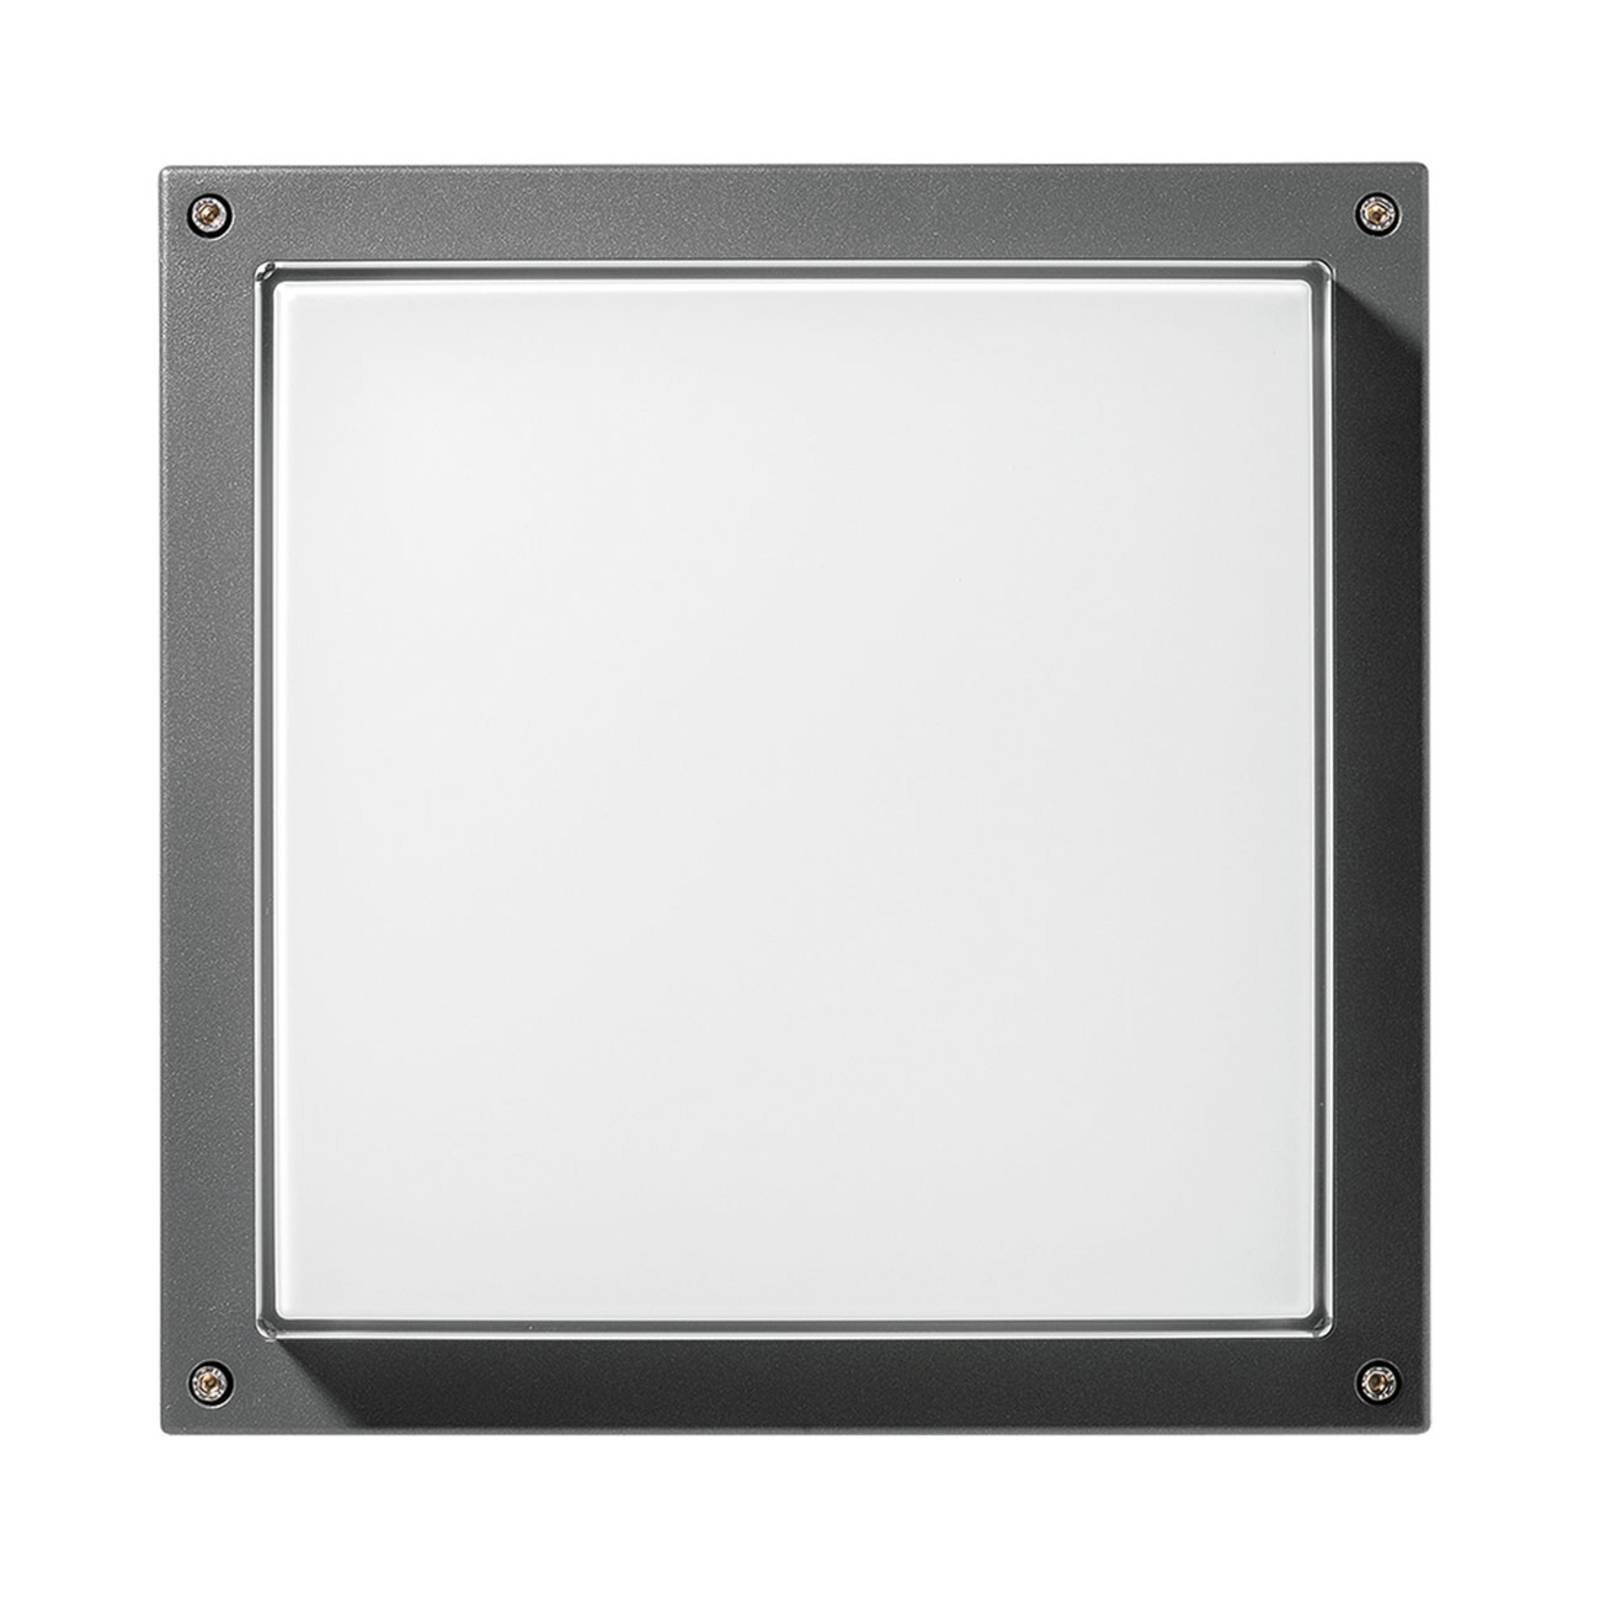 Image of Applique Bliz Square 40 3 000K anthracite dimmable 8018367639148